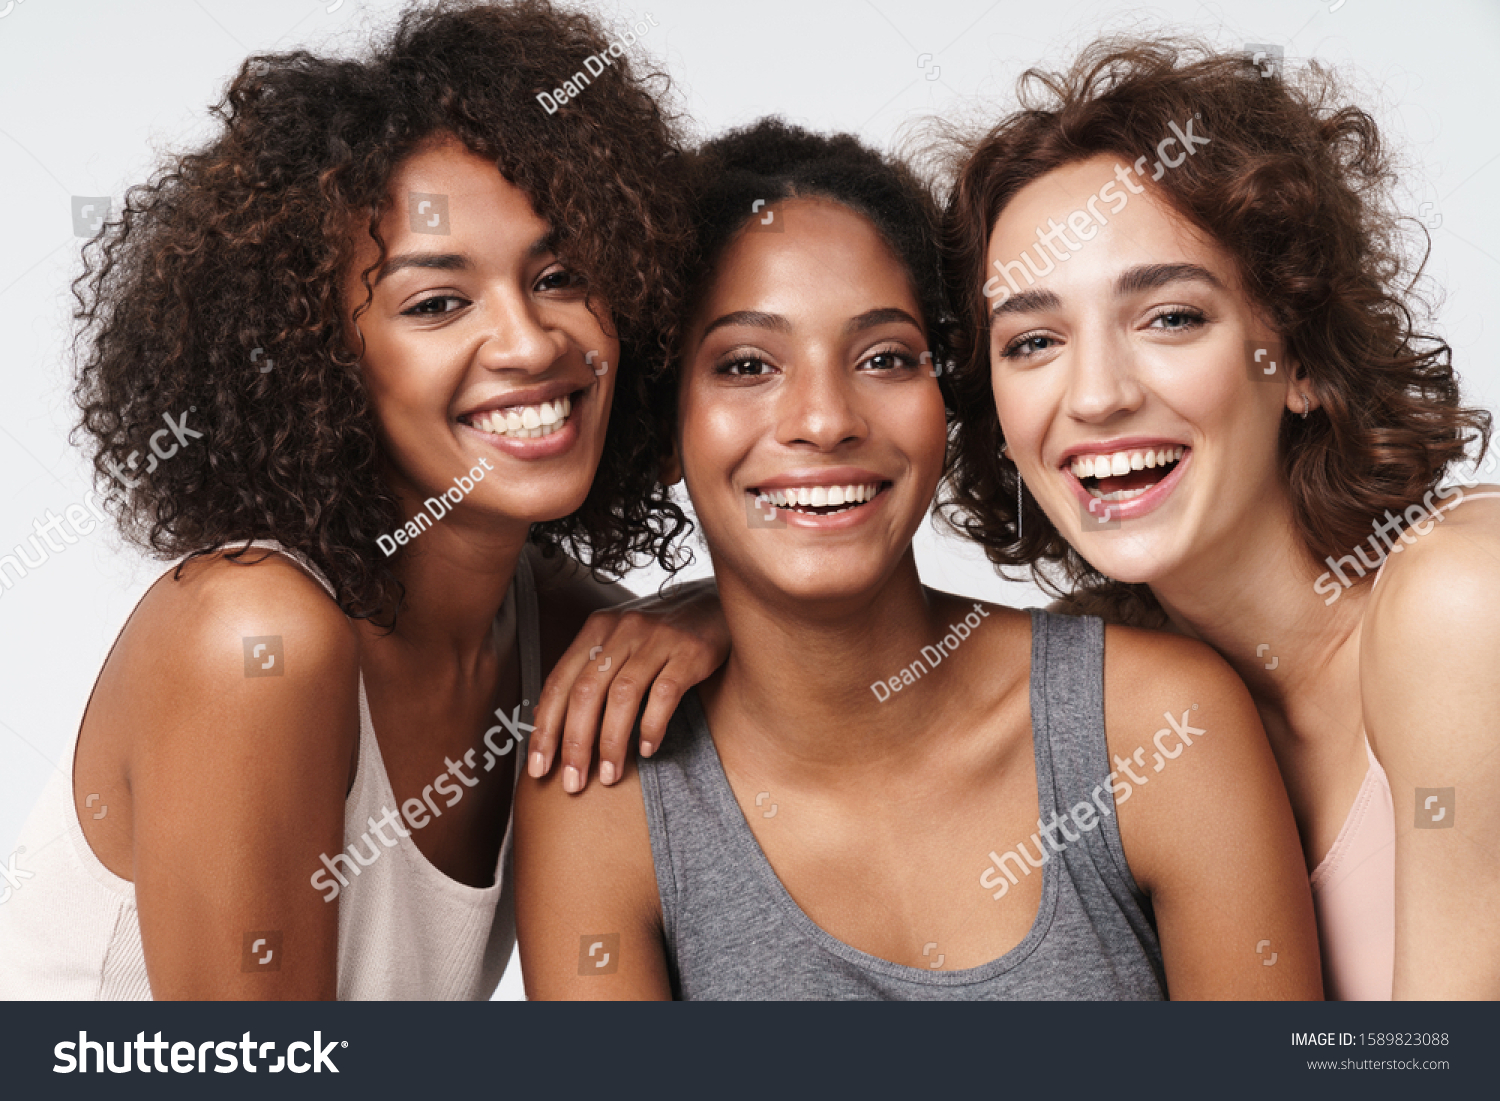 Portrait of three young multiracial women standing together and smiling at camera isolated over white background #1589823088